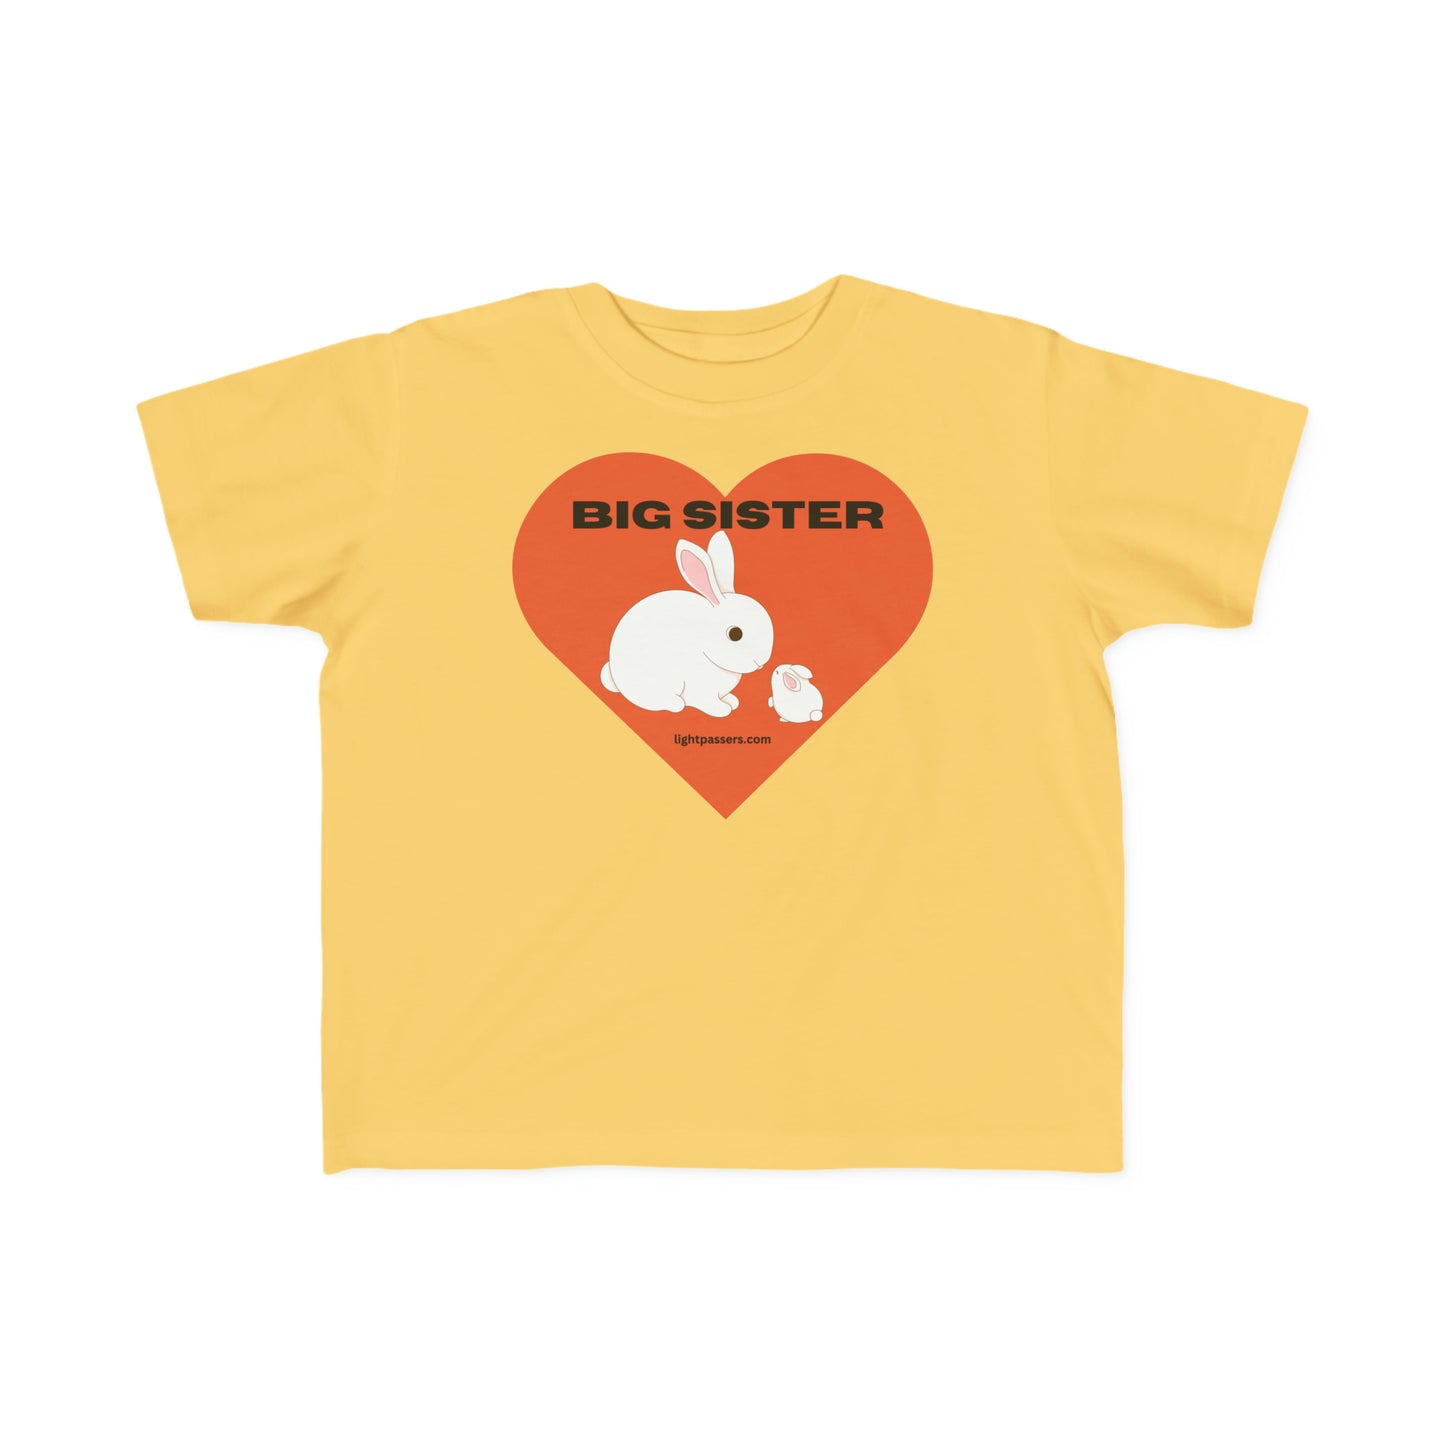 Light Passers Marketplace "Big Sister: with white bunnies and Orange heart Toddler Fine Jersey T-shirt Simple Messages